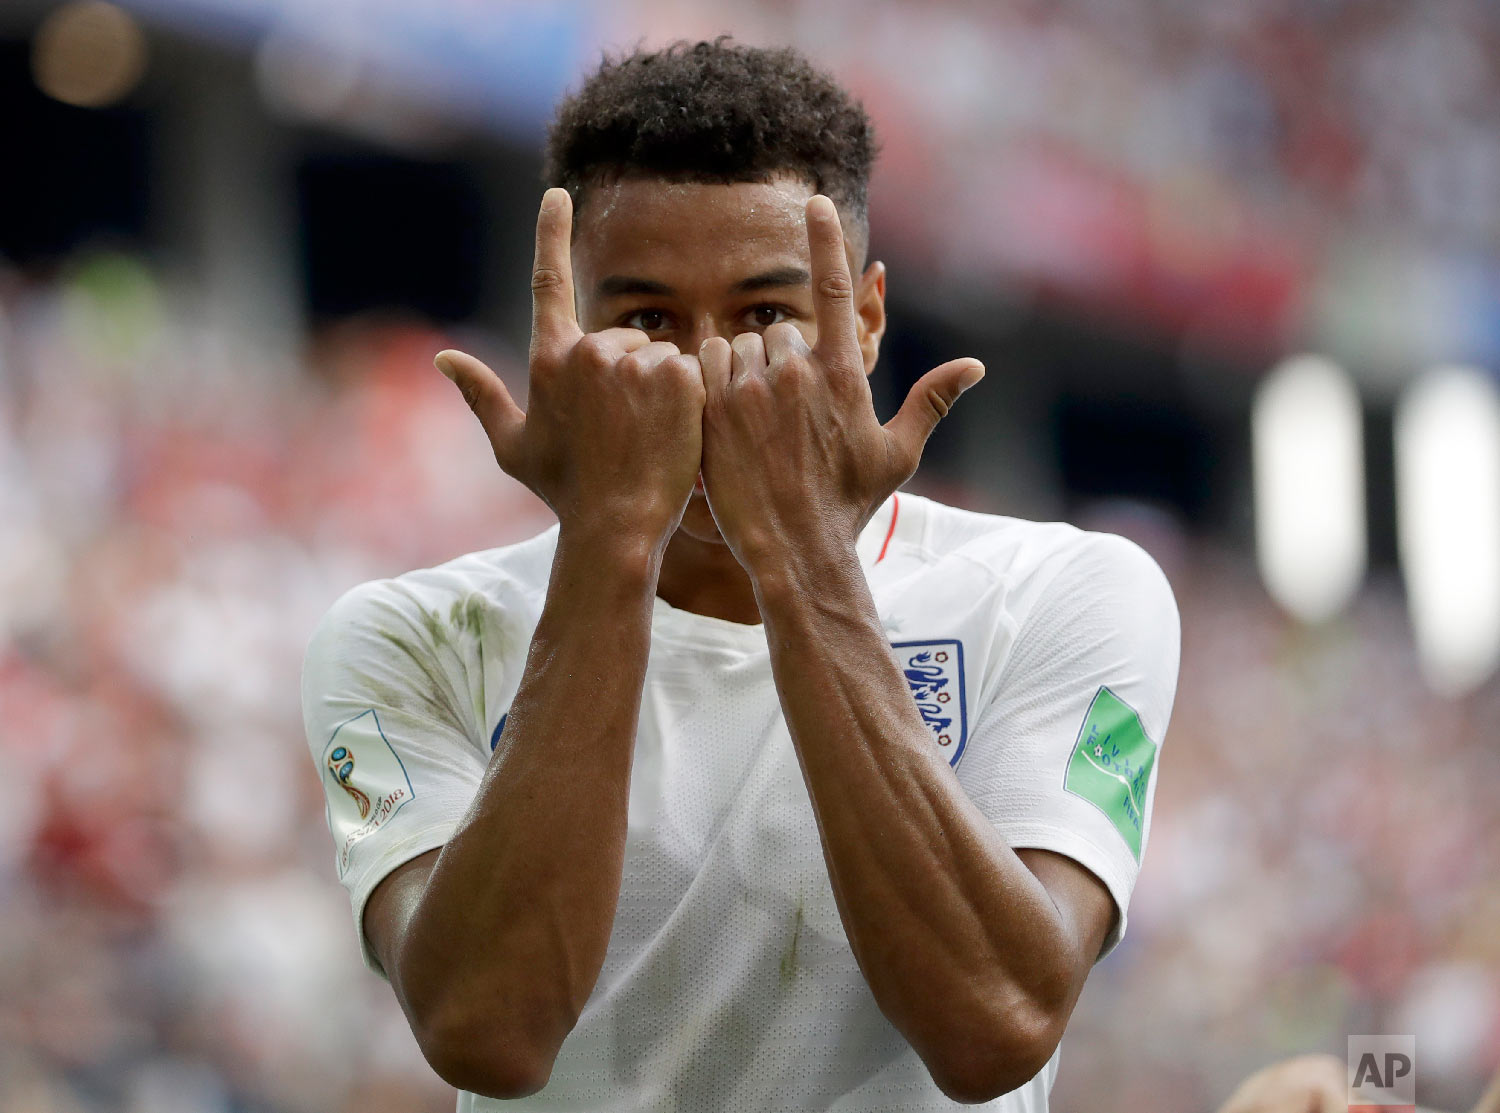  England's Jesse Lingard celebrates as he celebrates after scoring his team's third goal during the group G match between England and Panama at the 2018 soccer World Cup at the Nizhny Novgorod Stadium in Nizhny Novgorod , Russia on June 24, 2018. (AP